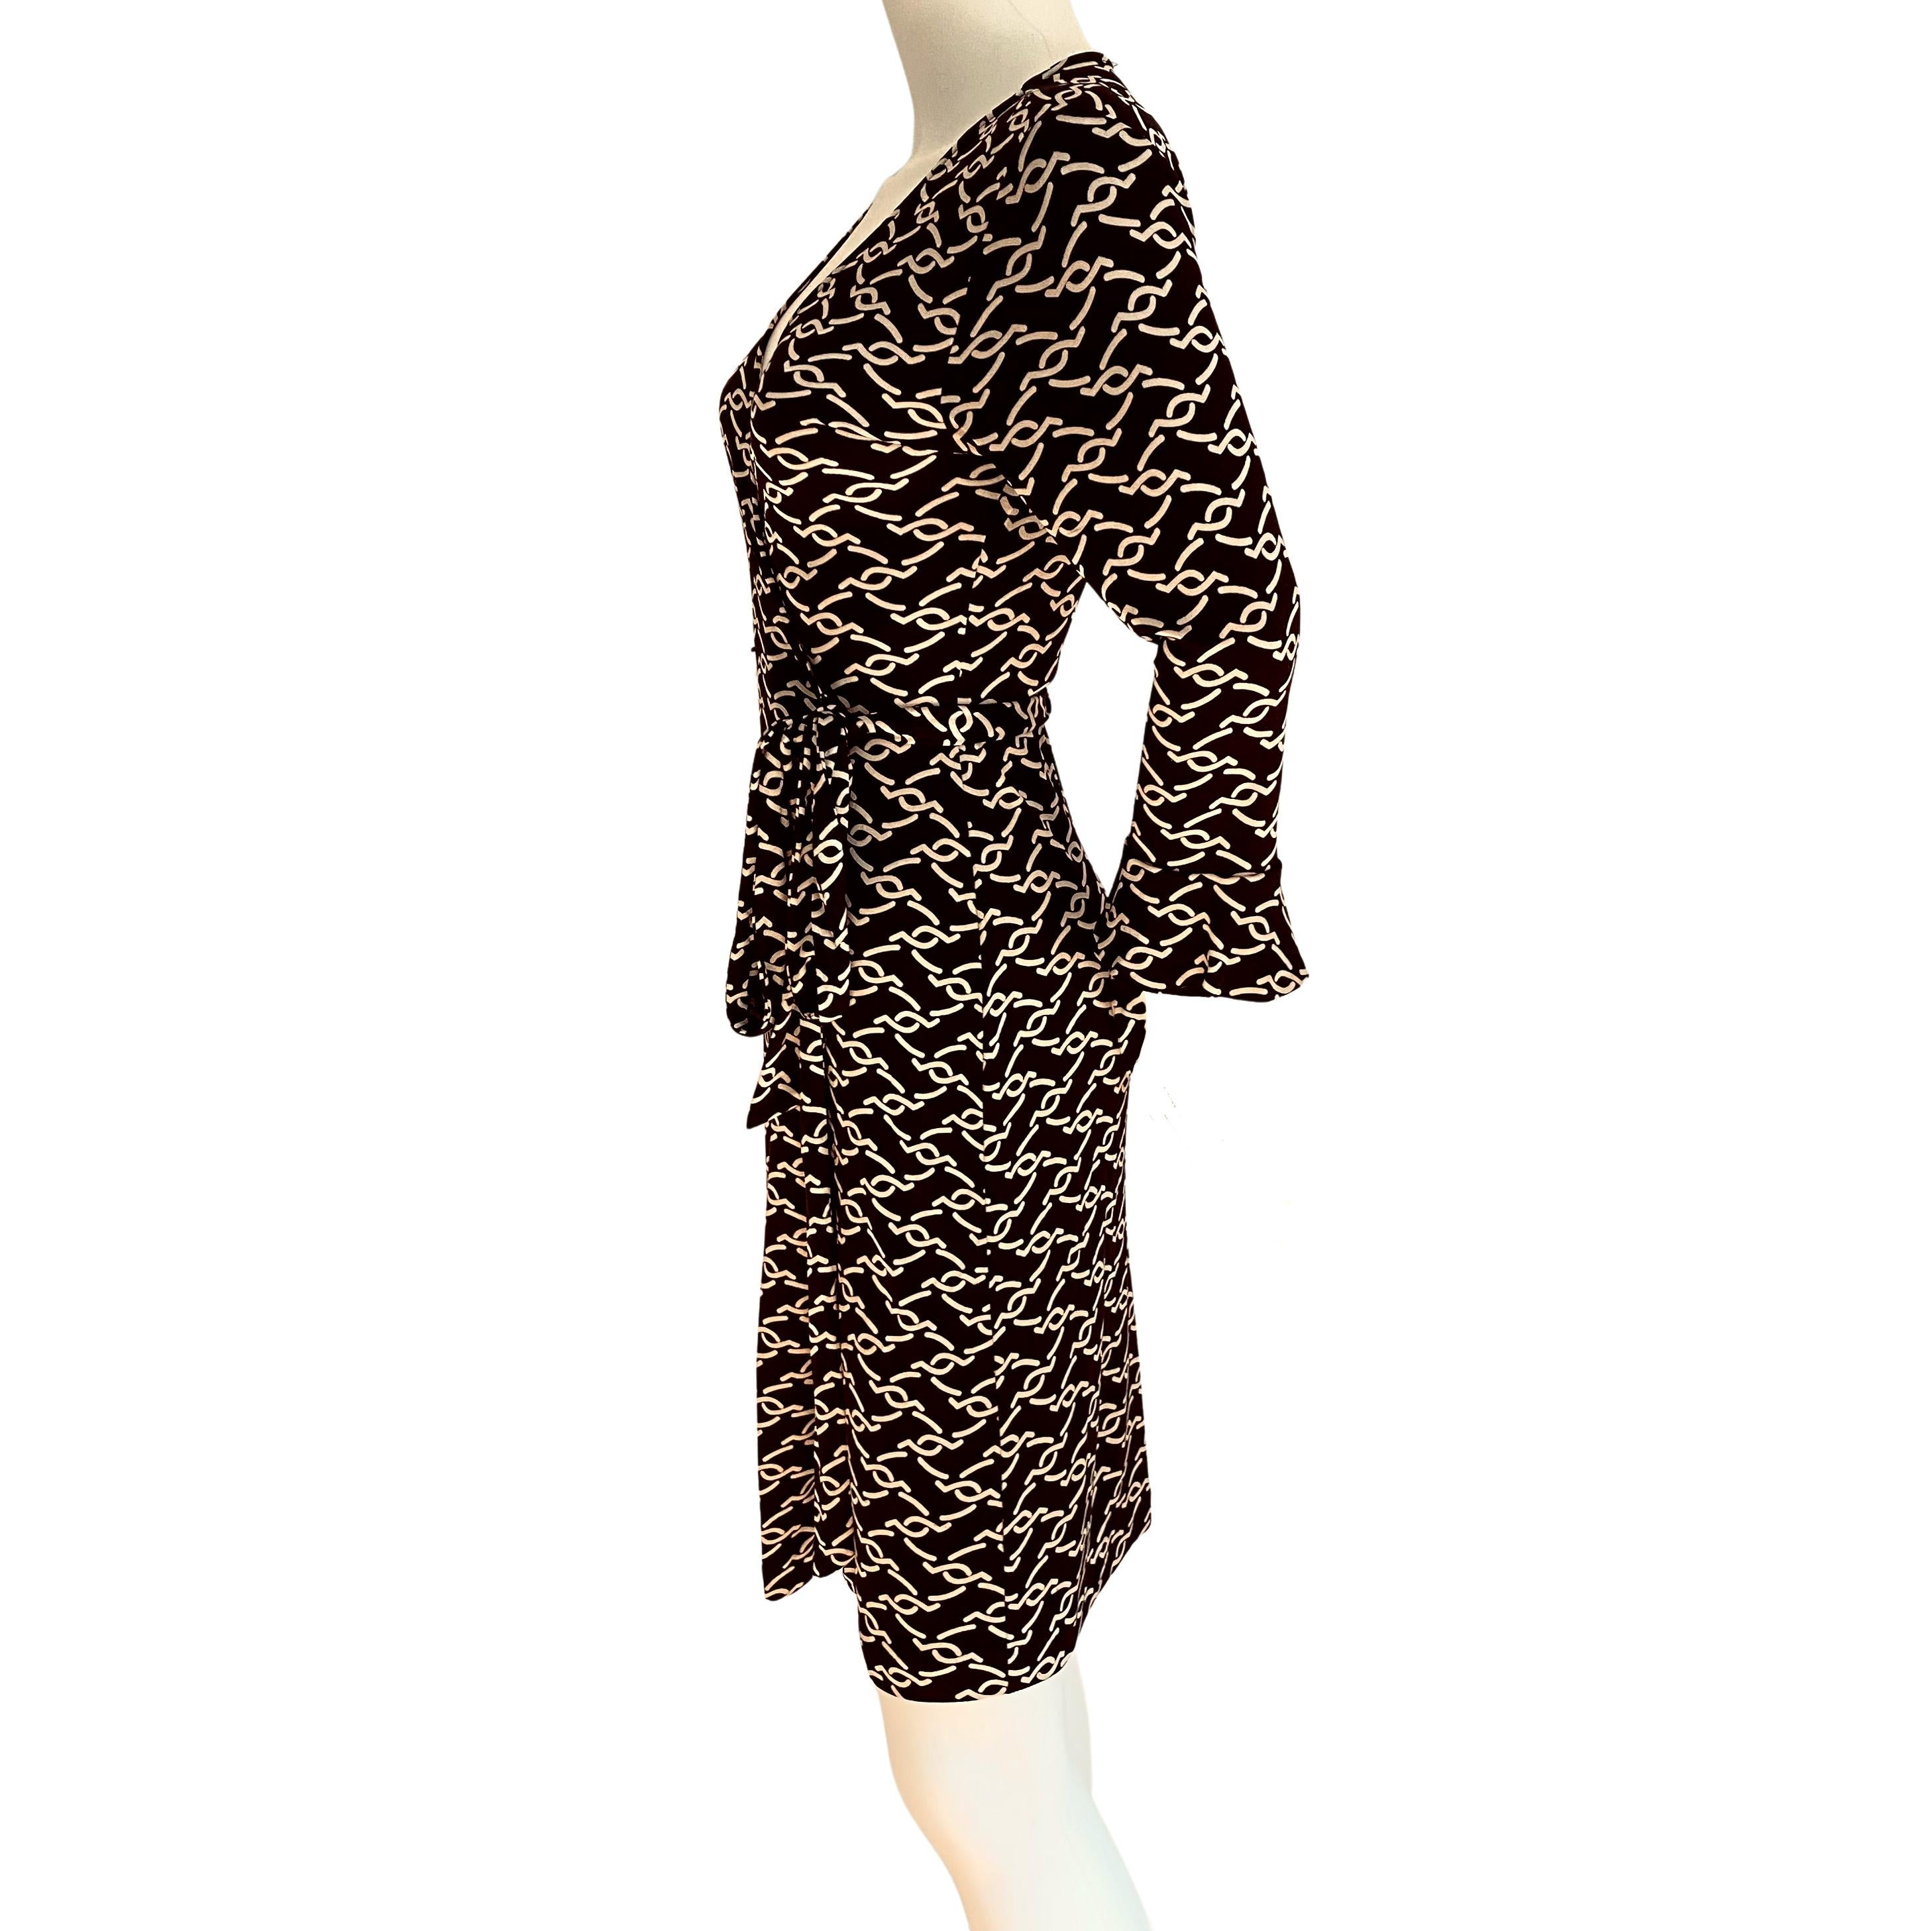 True wrap dress with 3/4 bell sleeves, in Flora's original 